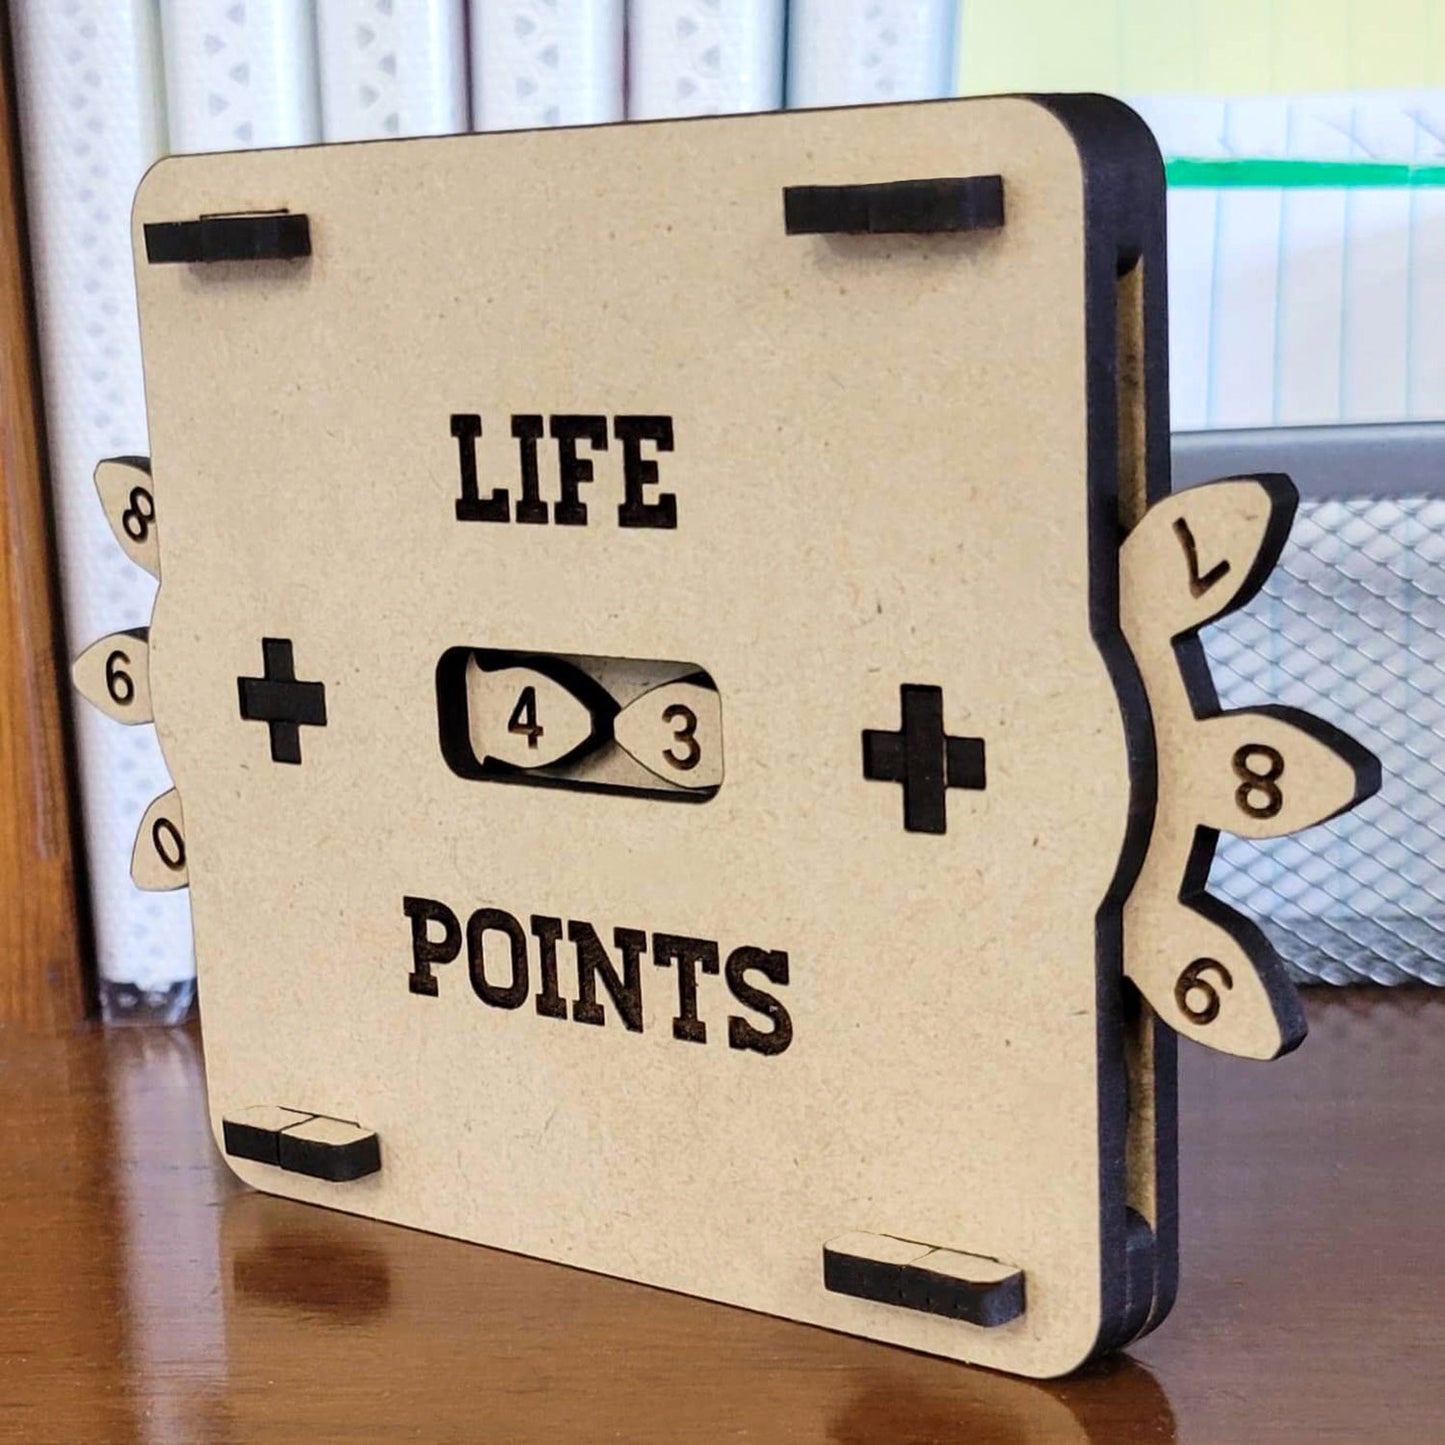 Life Point Counter